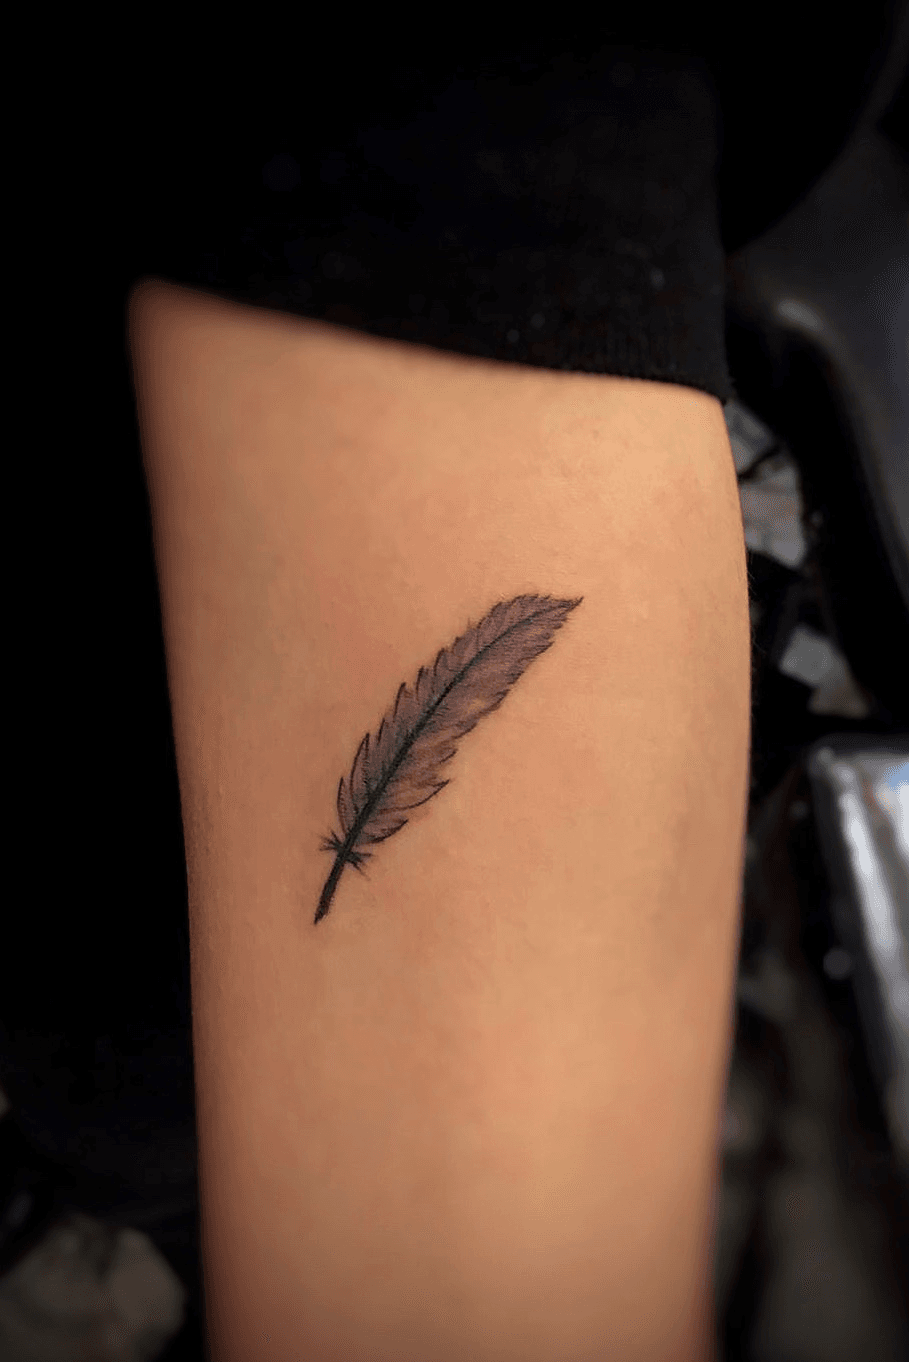 51 Tiny Tattoos Youre Going To Be Obsessed With  TattooBlend